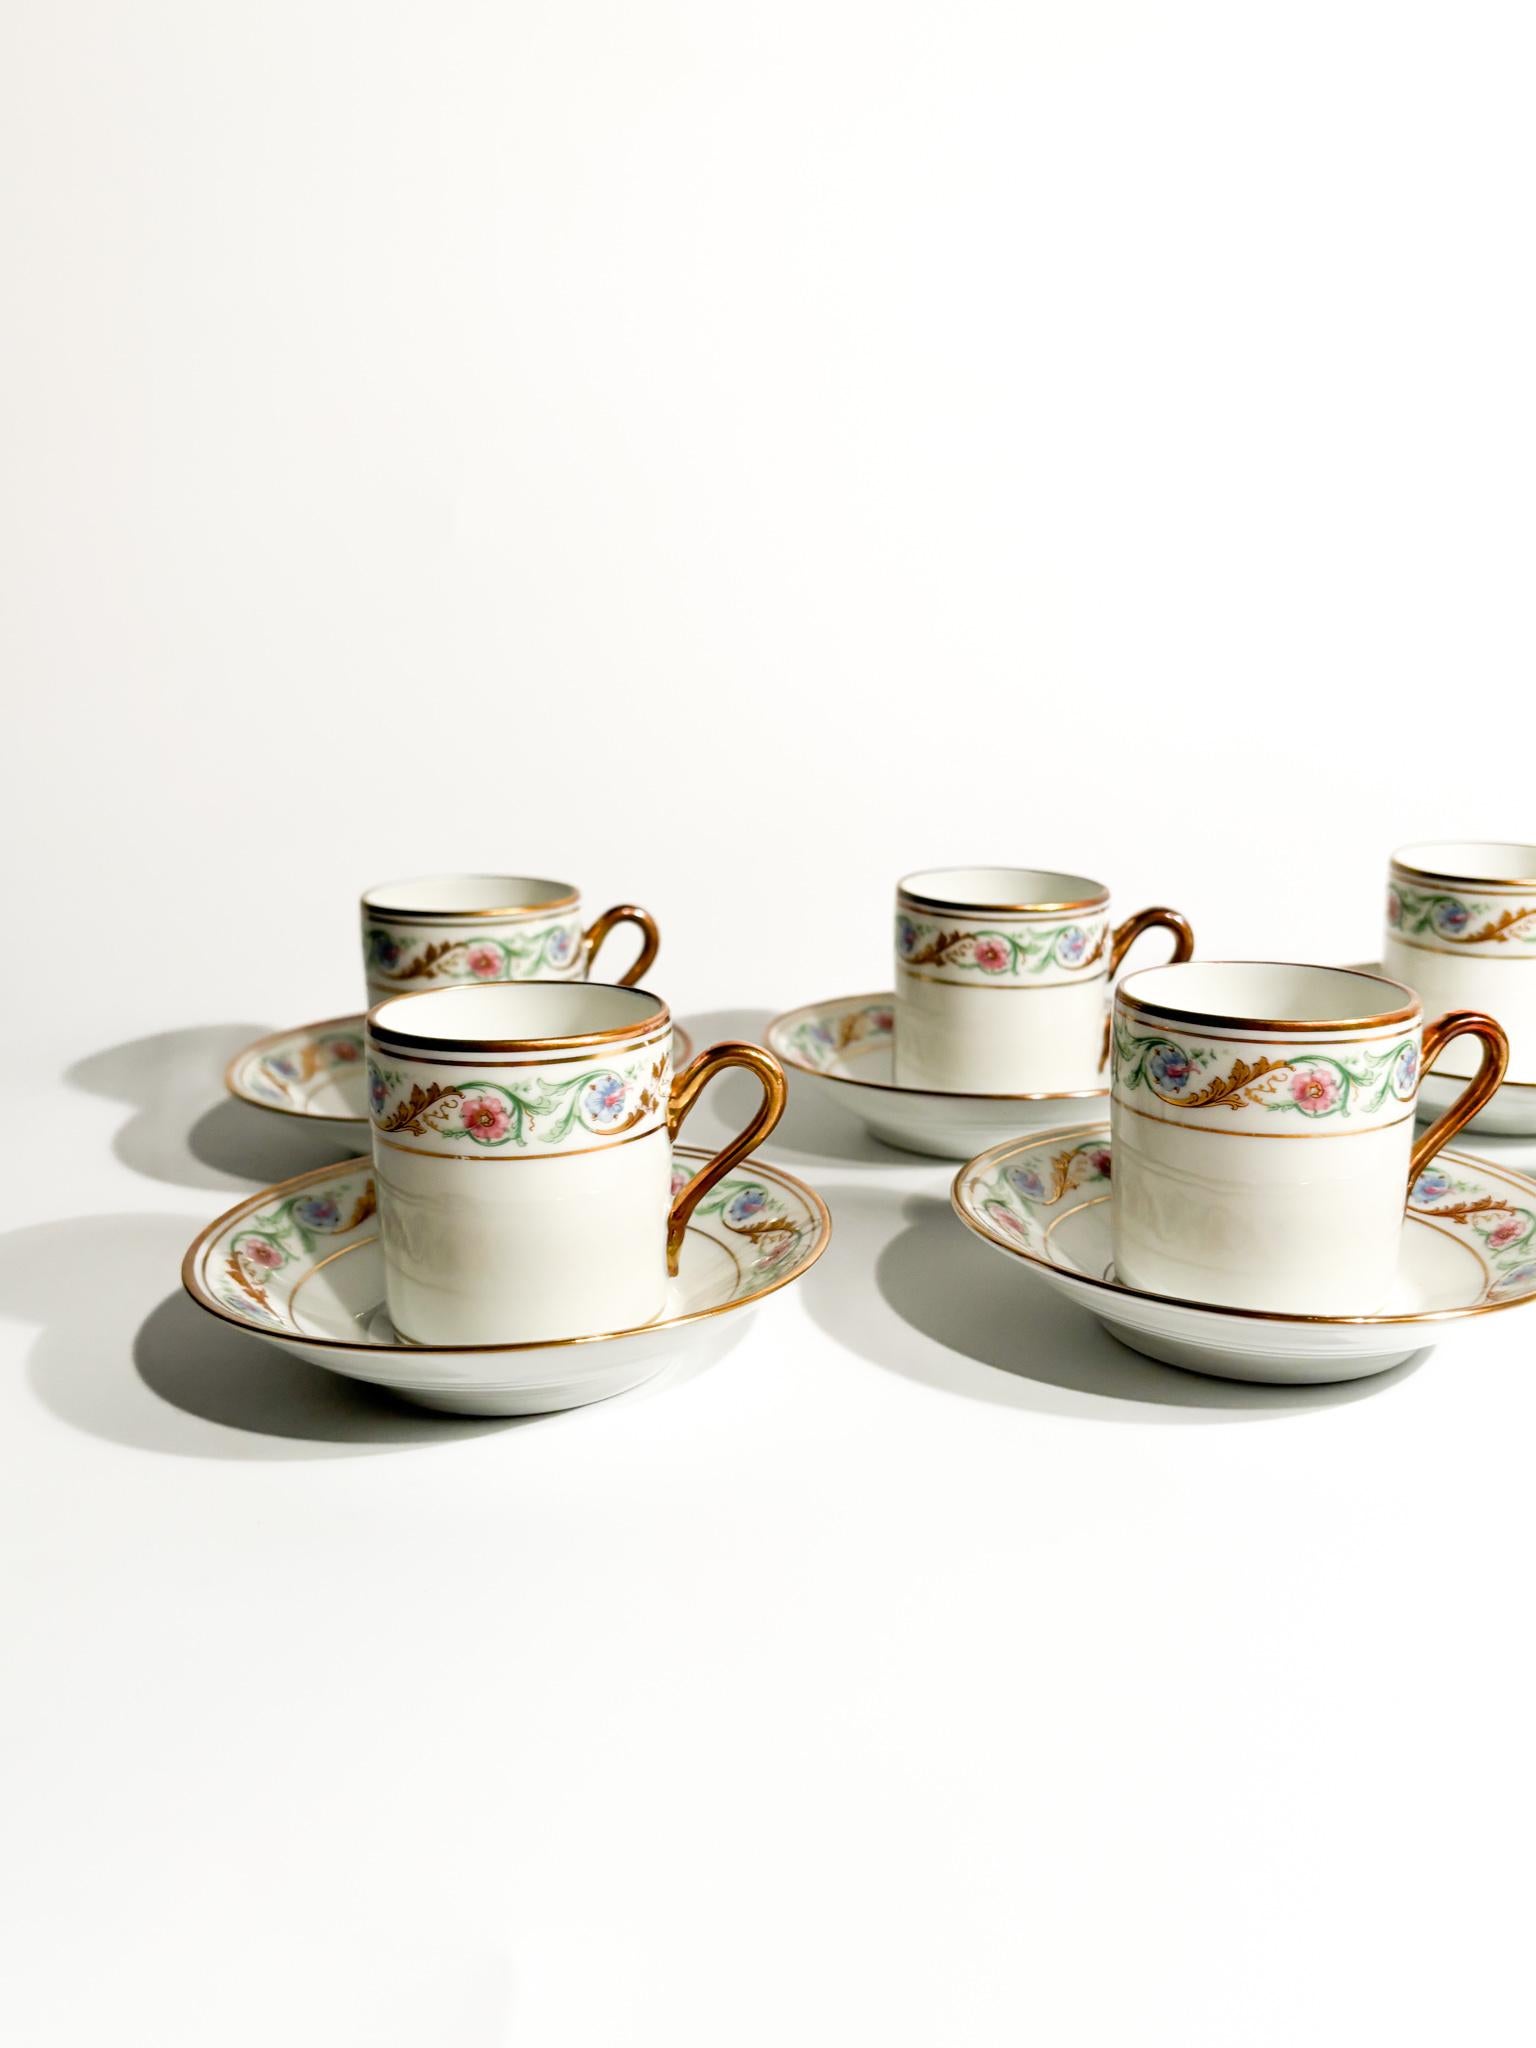 Art Deco Set of Six Porcelain Coffee Cups by Ginori Doccia Pittoria from the 1940s For Sale